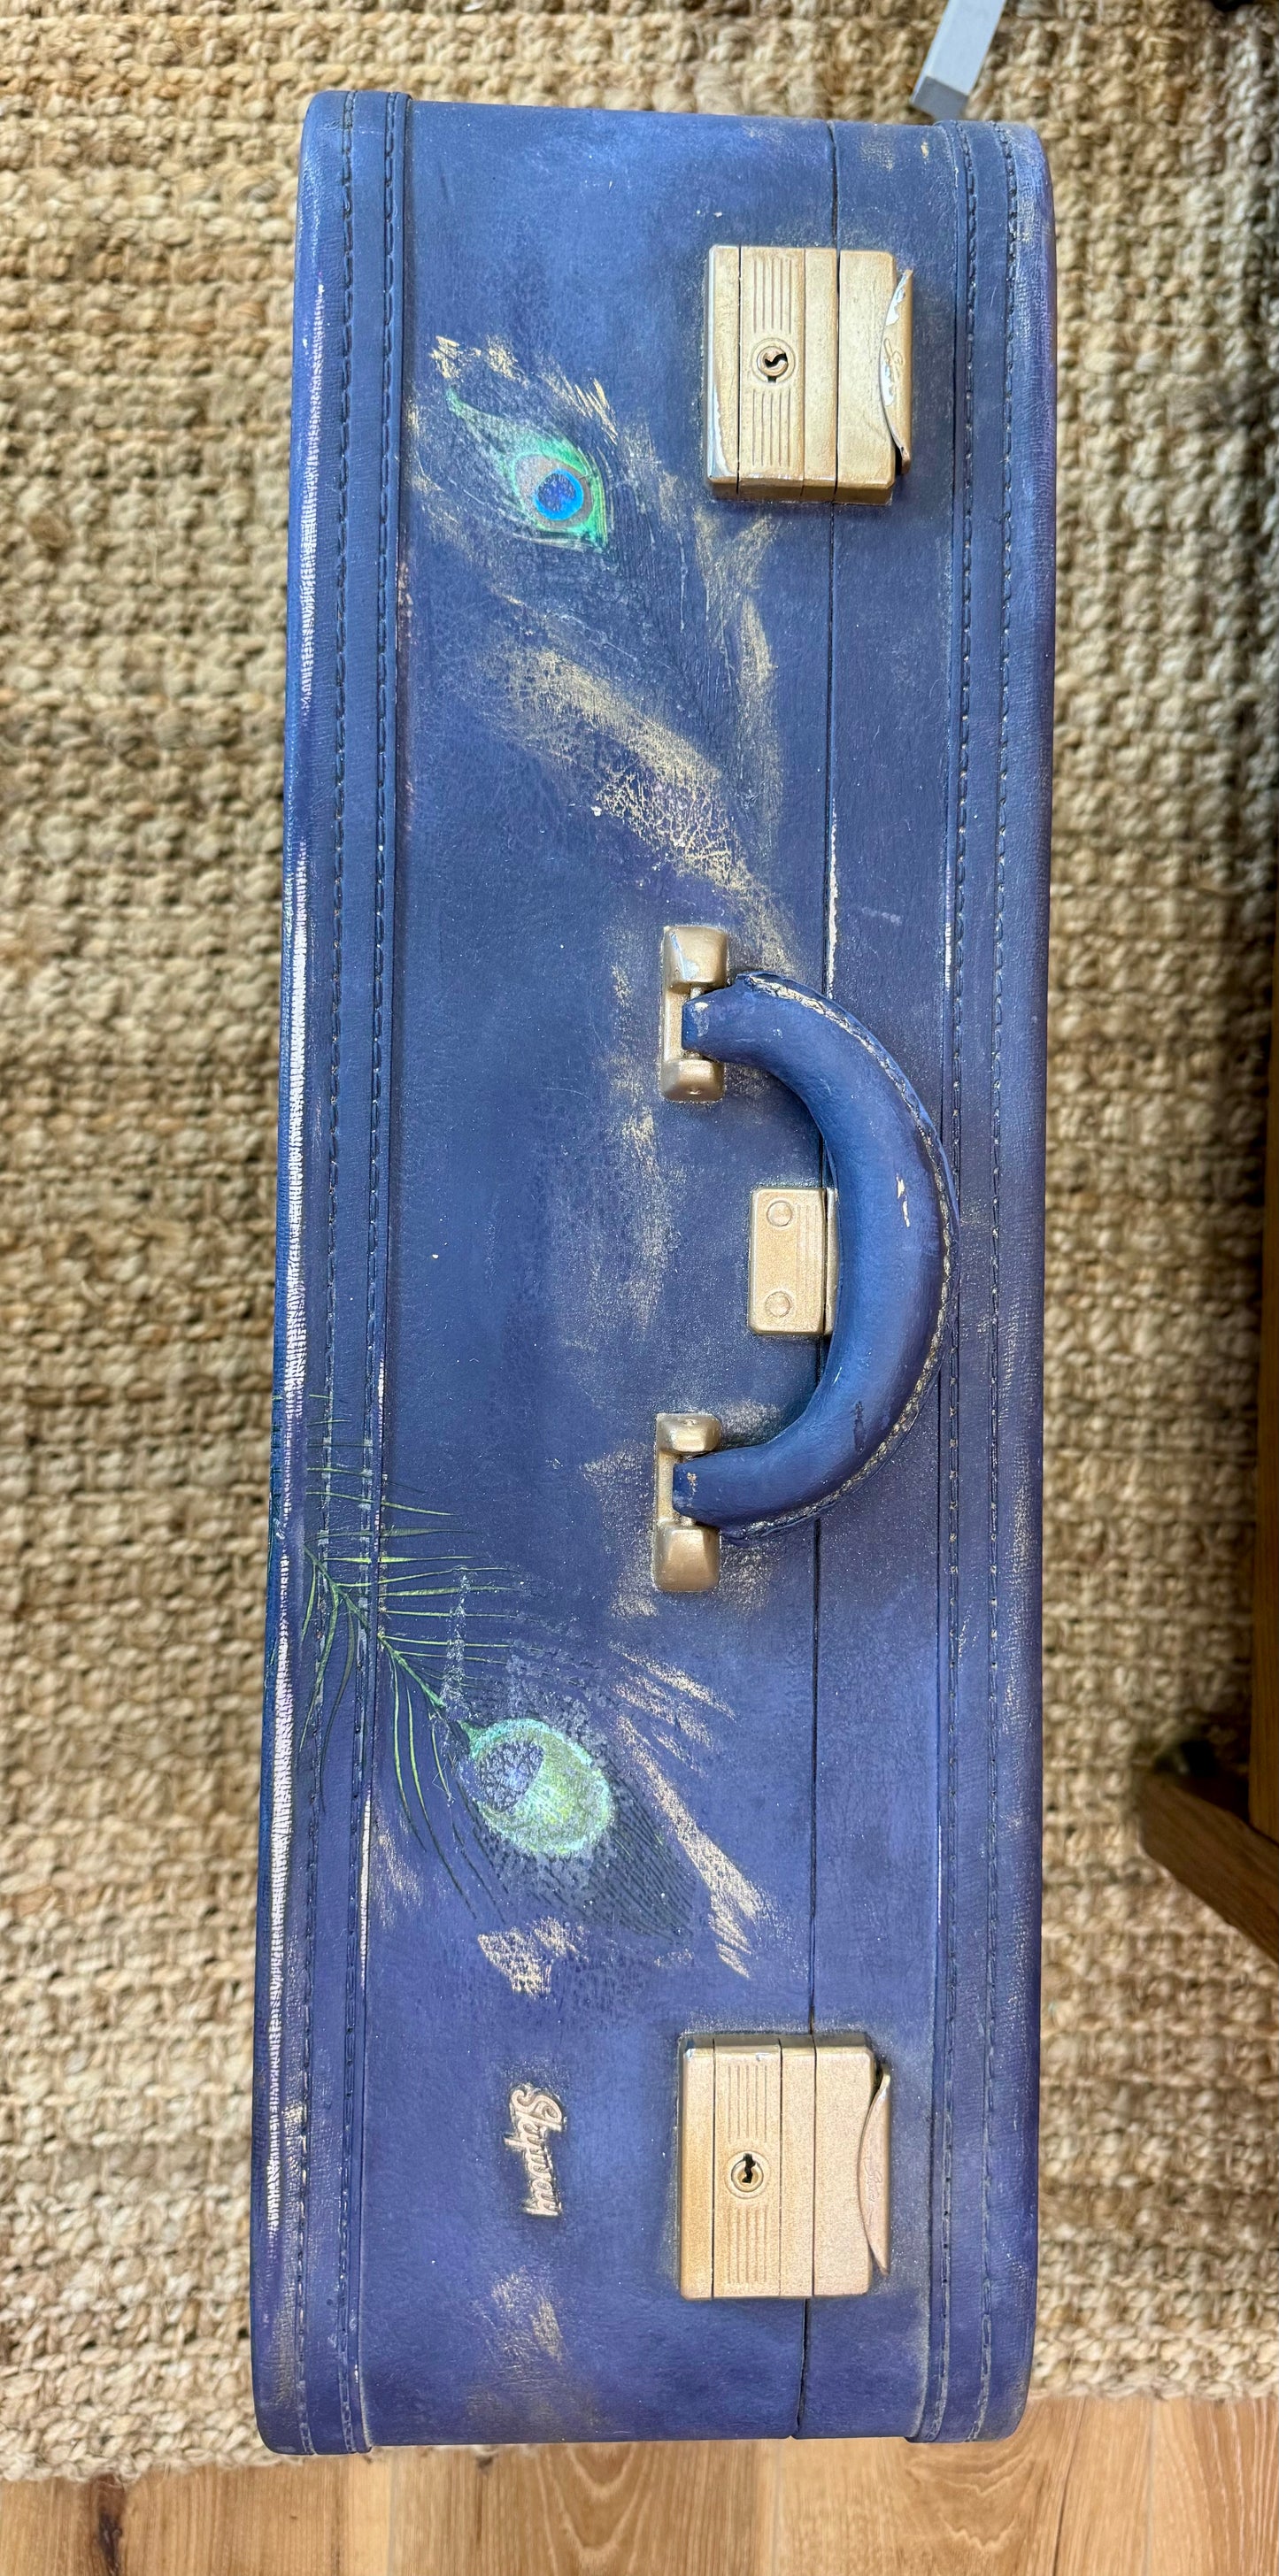 Peacock Transfer Painted Vintage Suitcase